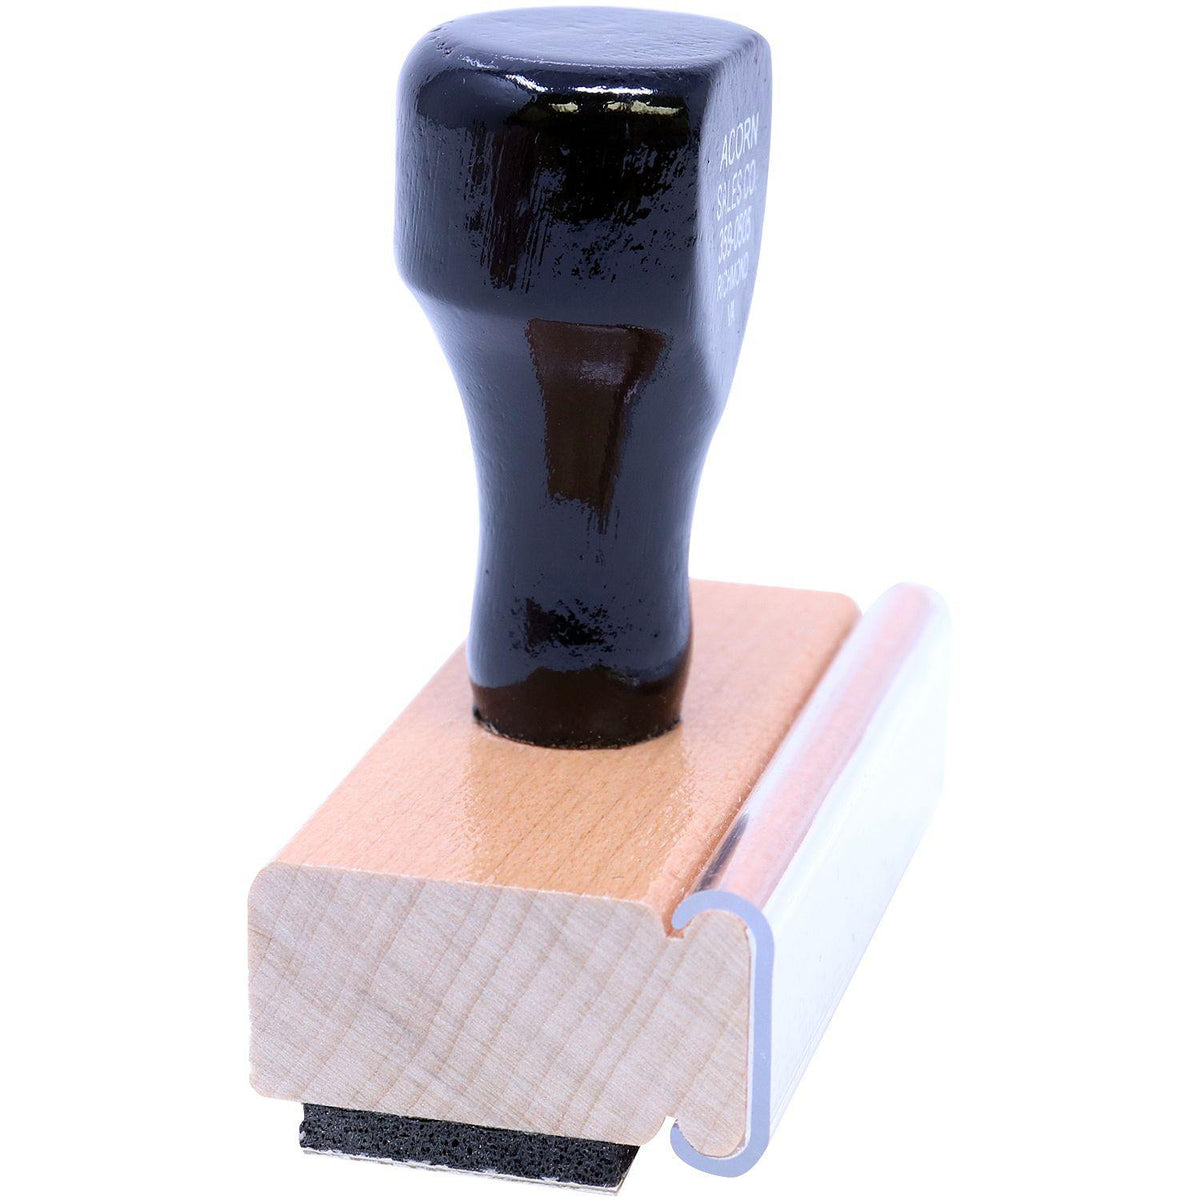 Side View of Entregado Rubber Stamp at an Angle